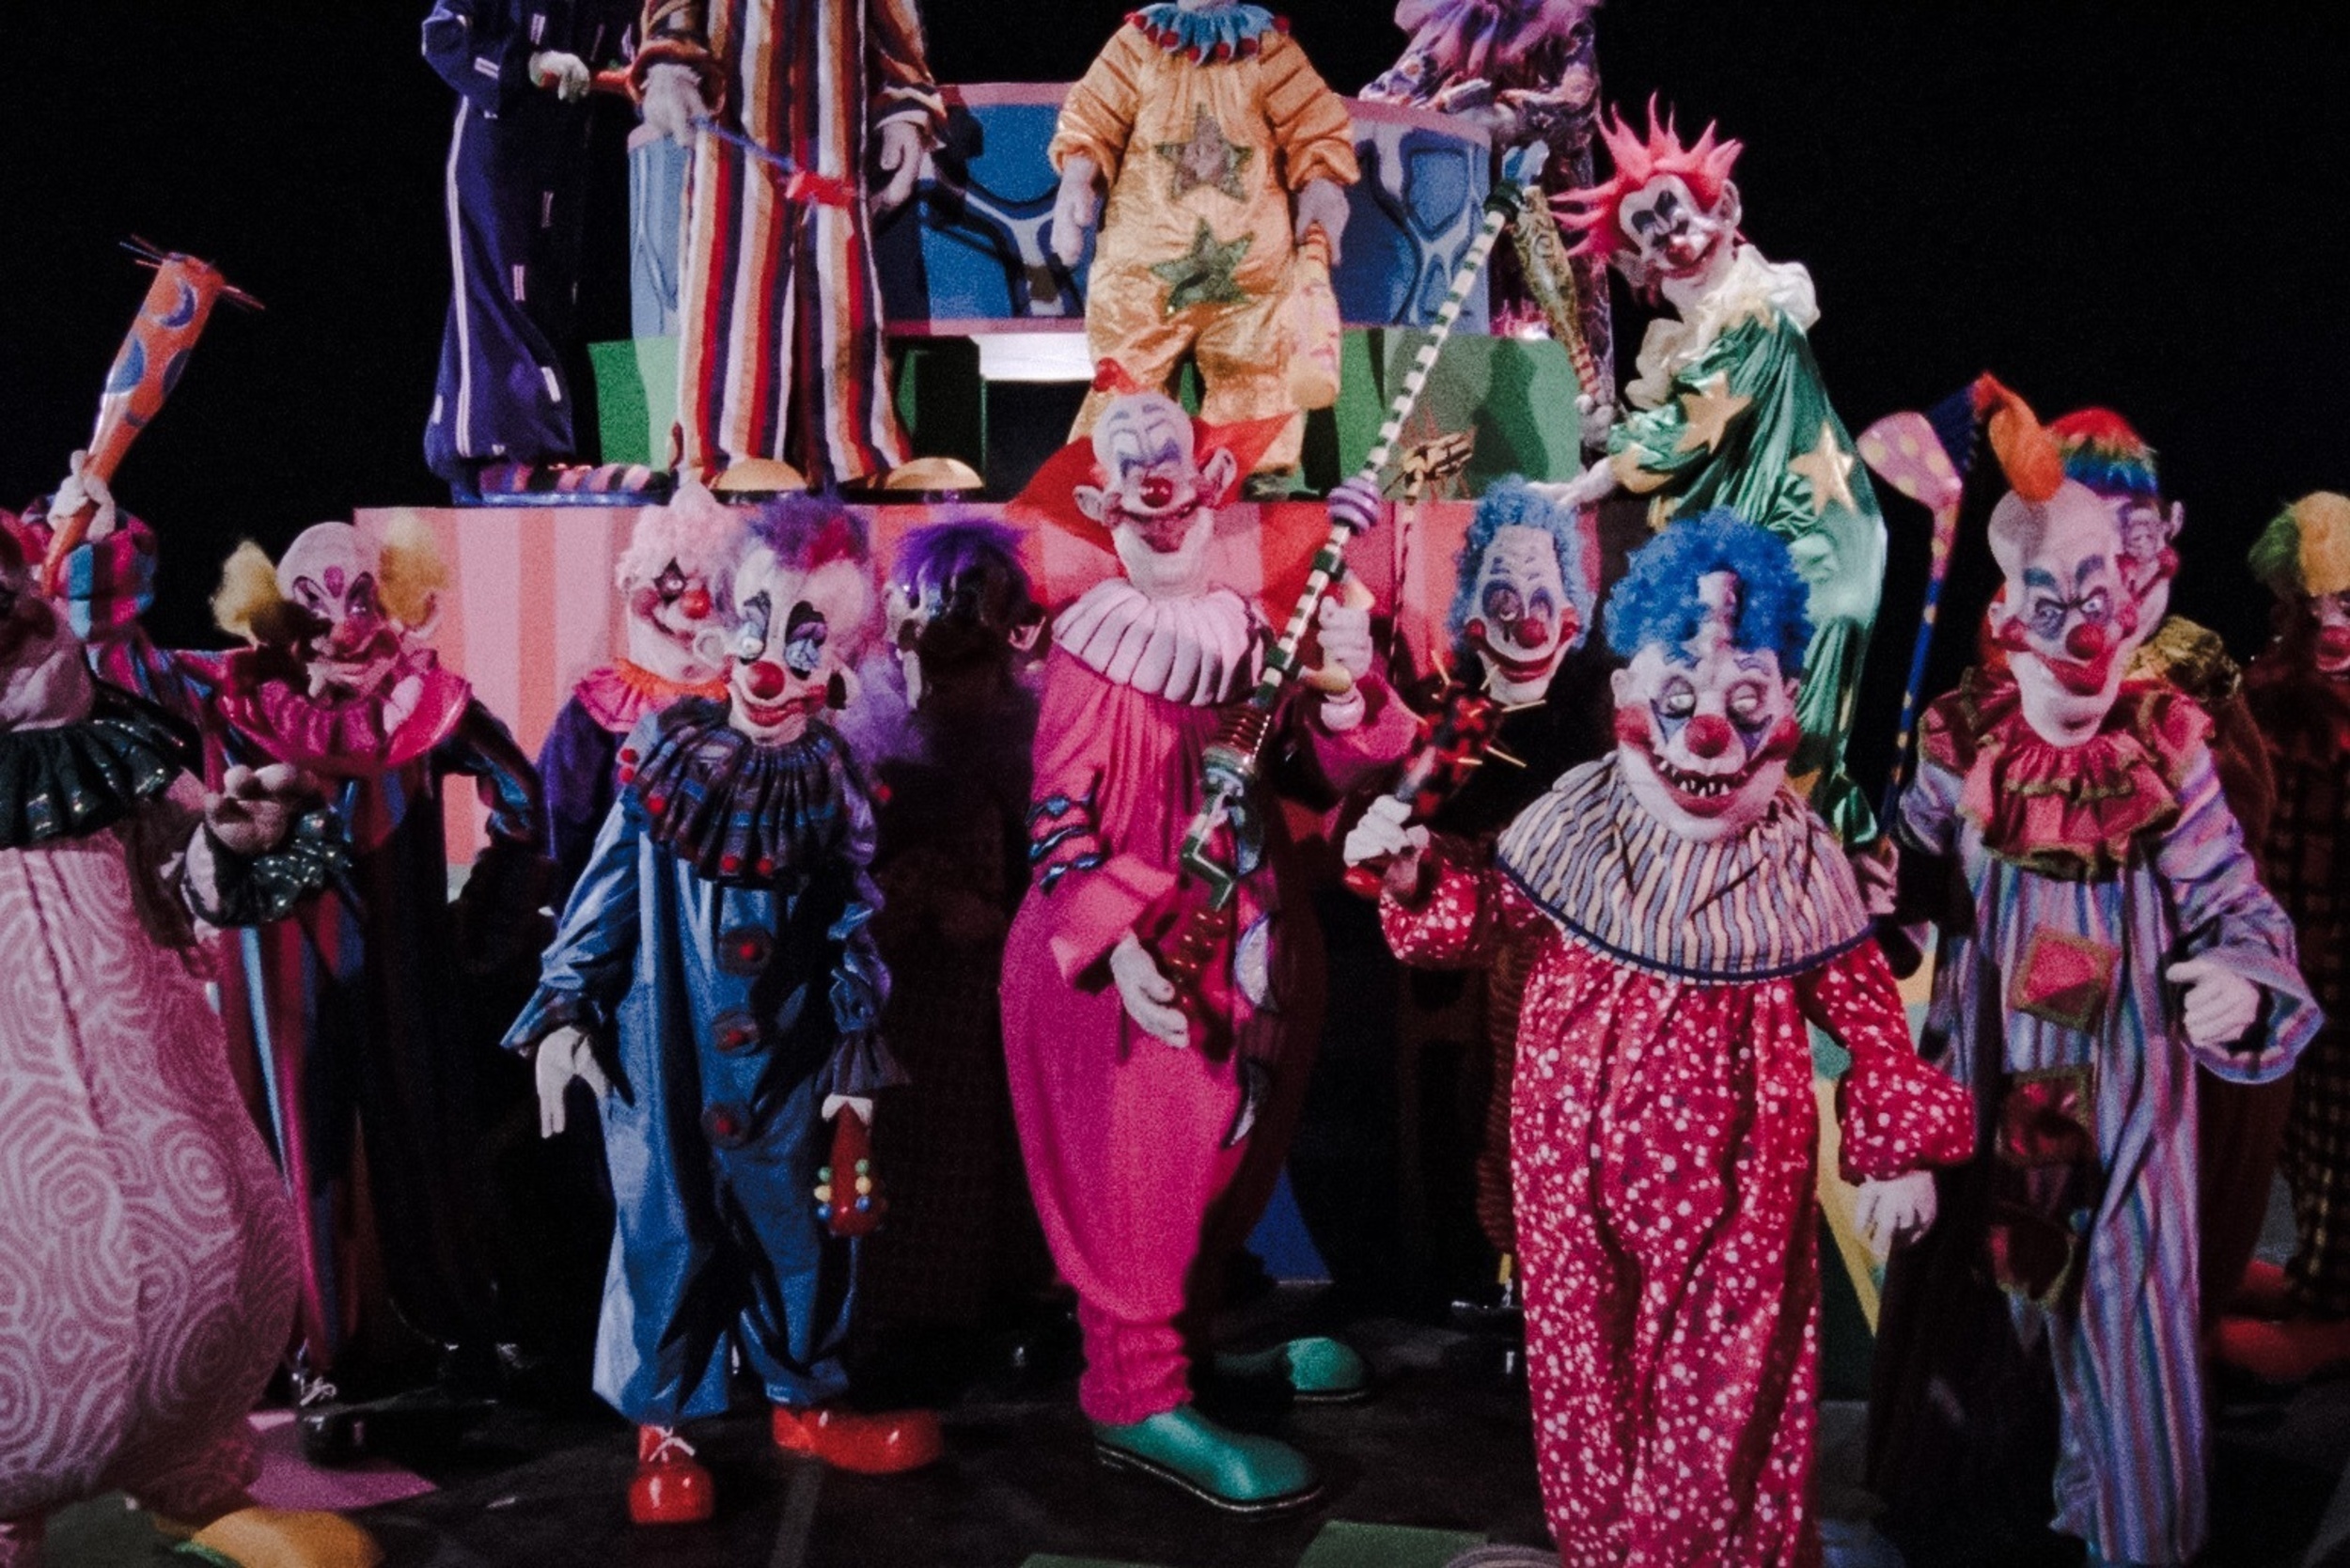 <p><em>Killer Klowns from Outer Space</em> features a whole fleet of freaky-looking clowns, but the movie is much more lighthearted than most of the other entries in this list. Yes, Slim, Shorty, Spike, and the other clowns kill plenty of people — true to the film’s title — but they do it in a comical way by shooting their victims with a cotton candy gun, among other wacky weapons. The film didn’t find a lot of fans among critics upon its initial release, but the B-movie has since become a certified cult classic for its extravagant visuals and loads of ‘80s cheese. </p><p>You may also like: <a href='https://www.yardbarker.com/entertainment/articles/the_ultimate_rush_playlist_121923/s1__34267772'>The ultimate Rush playlist</a></p>